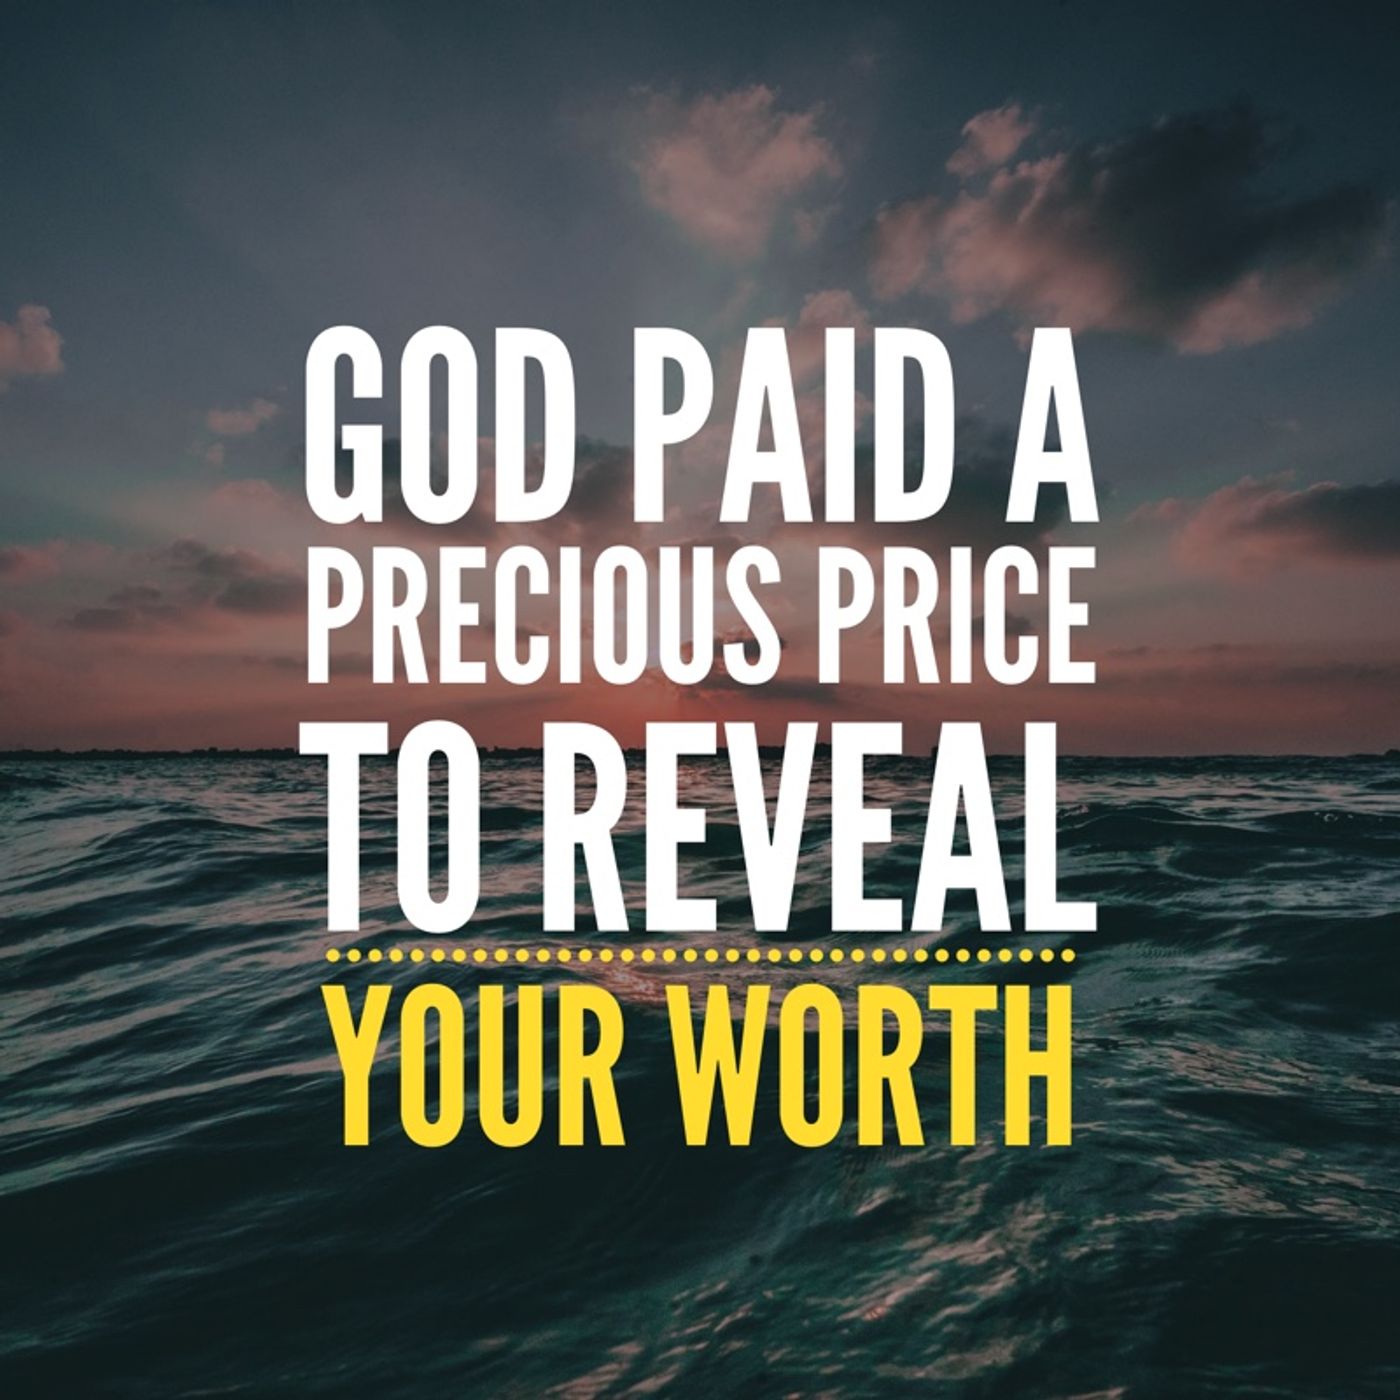 Prayer to Experience Your Valuable Worth to God Proven in His Marvelous Love